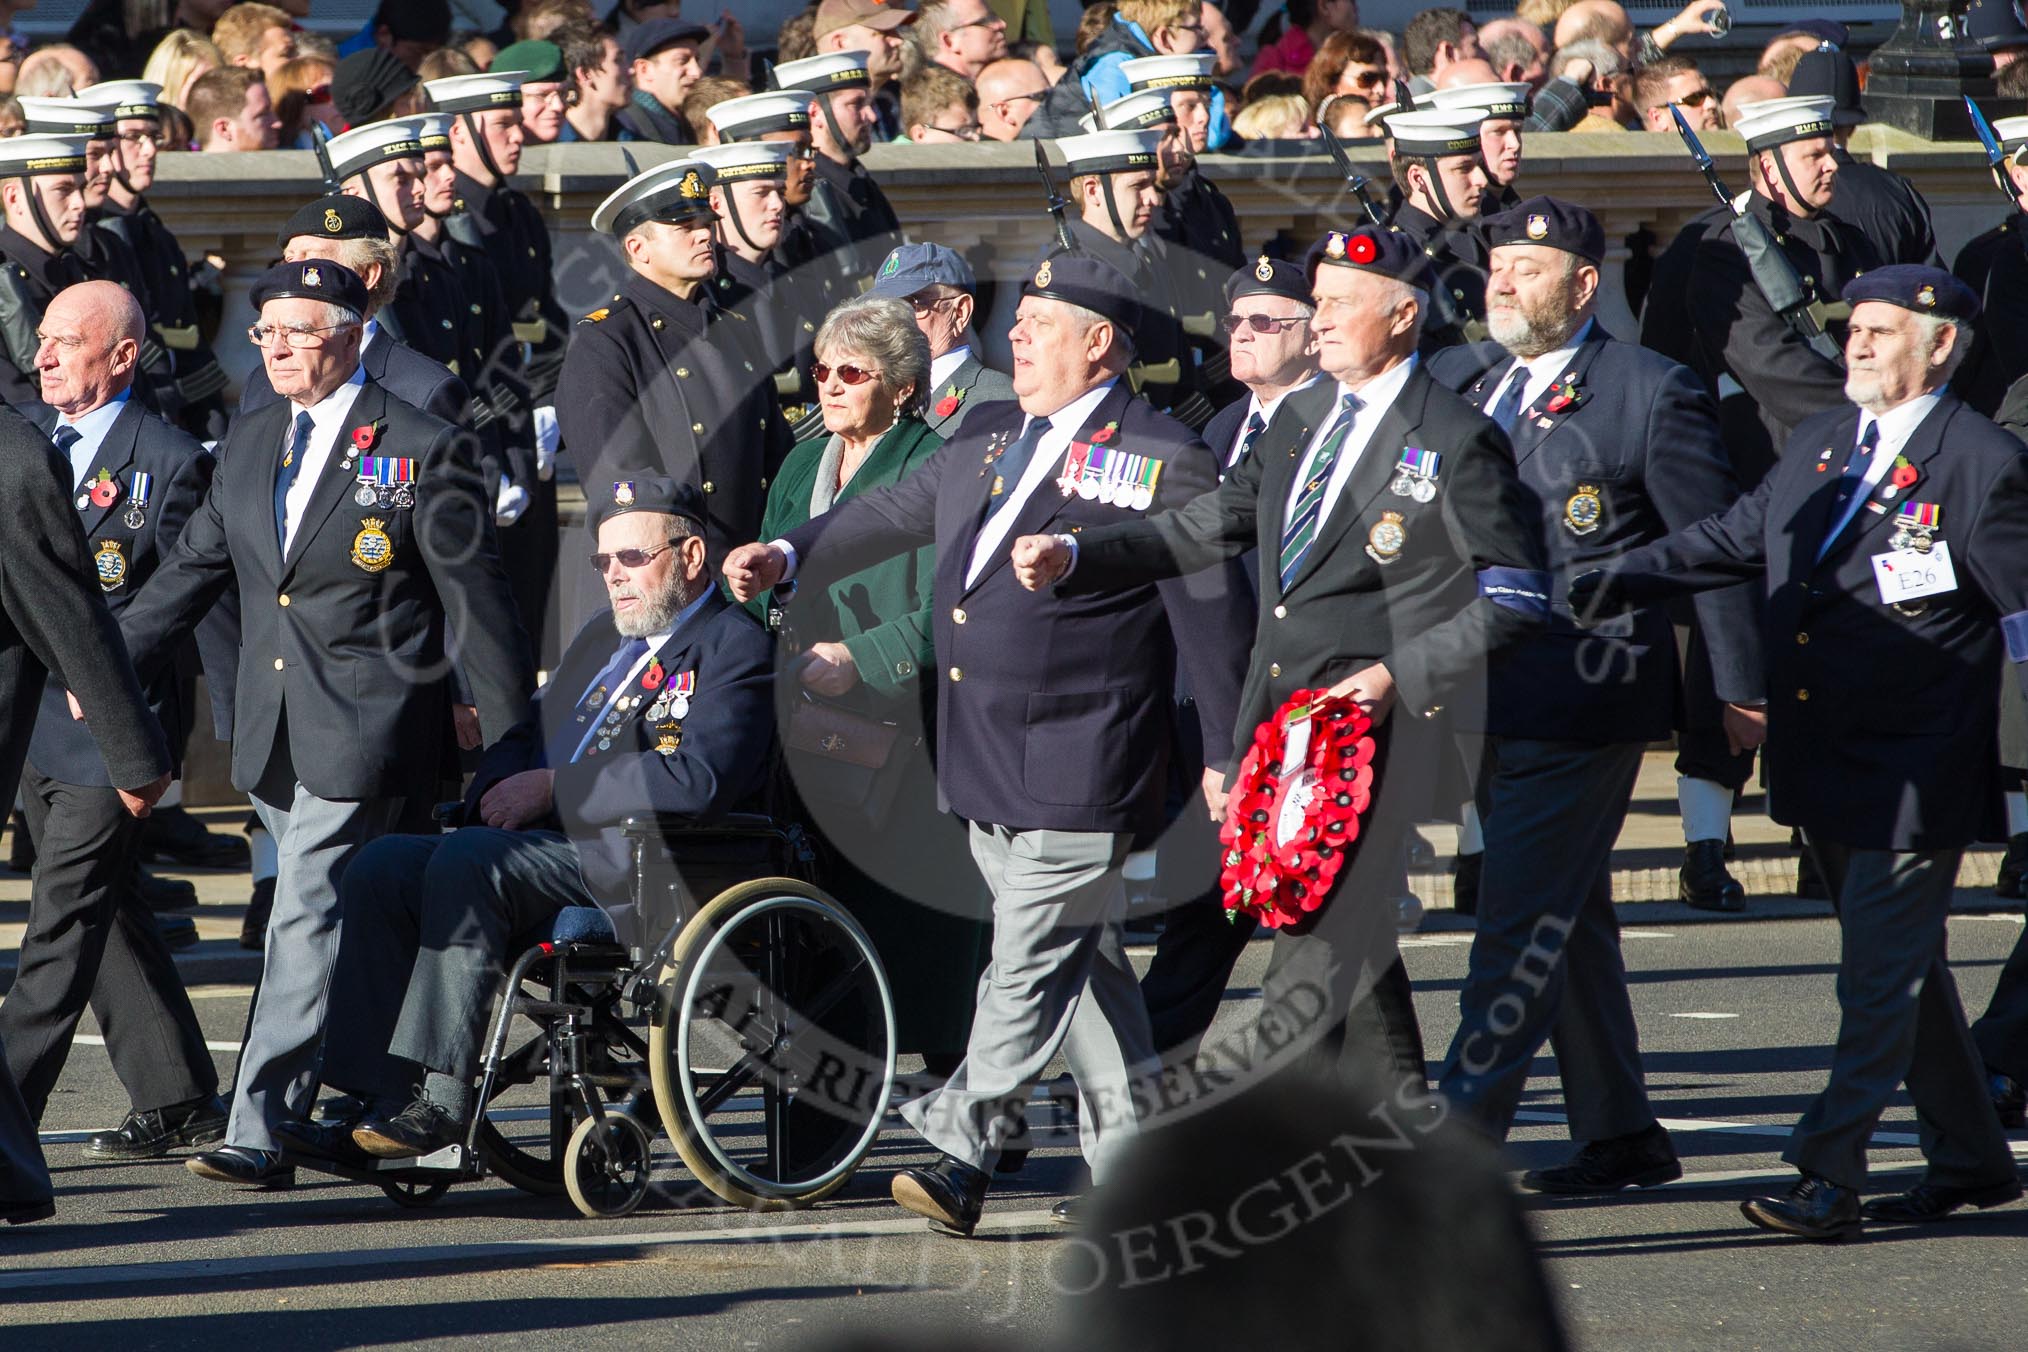 Remembrance Sunday 2012 Cenotaph March Past: Group E26 - Ton Class Association..
Whitehall, Cenotaph,
London SW1,

United Kingdom,
on 11 November 2012 at 11:41, image #183